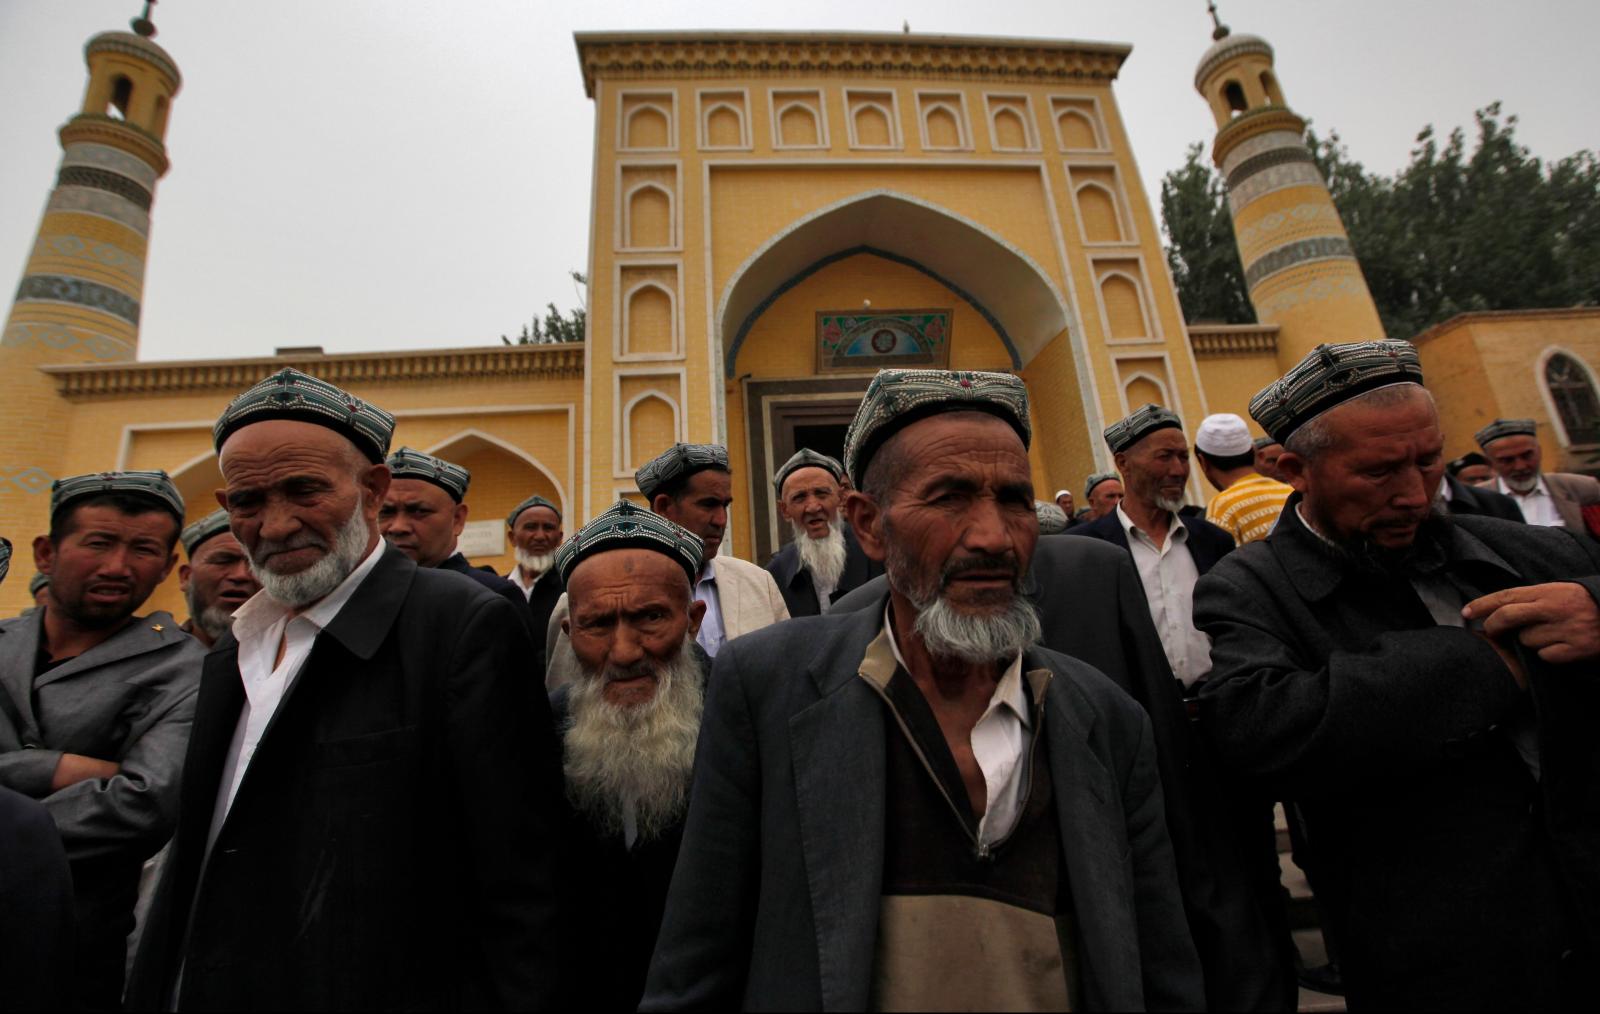 Calls grow for U.N. action on China’s Muslim ‘re-education camps’